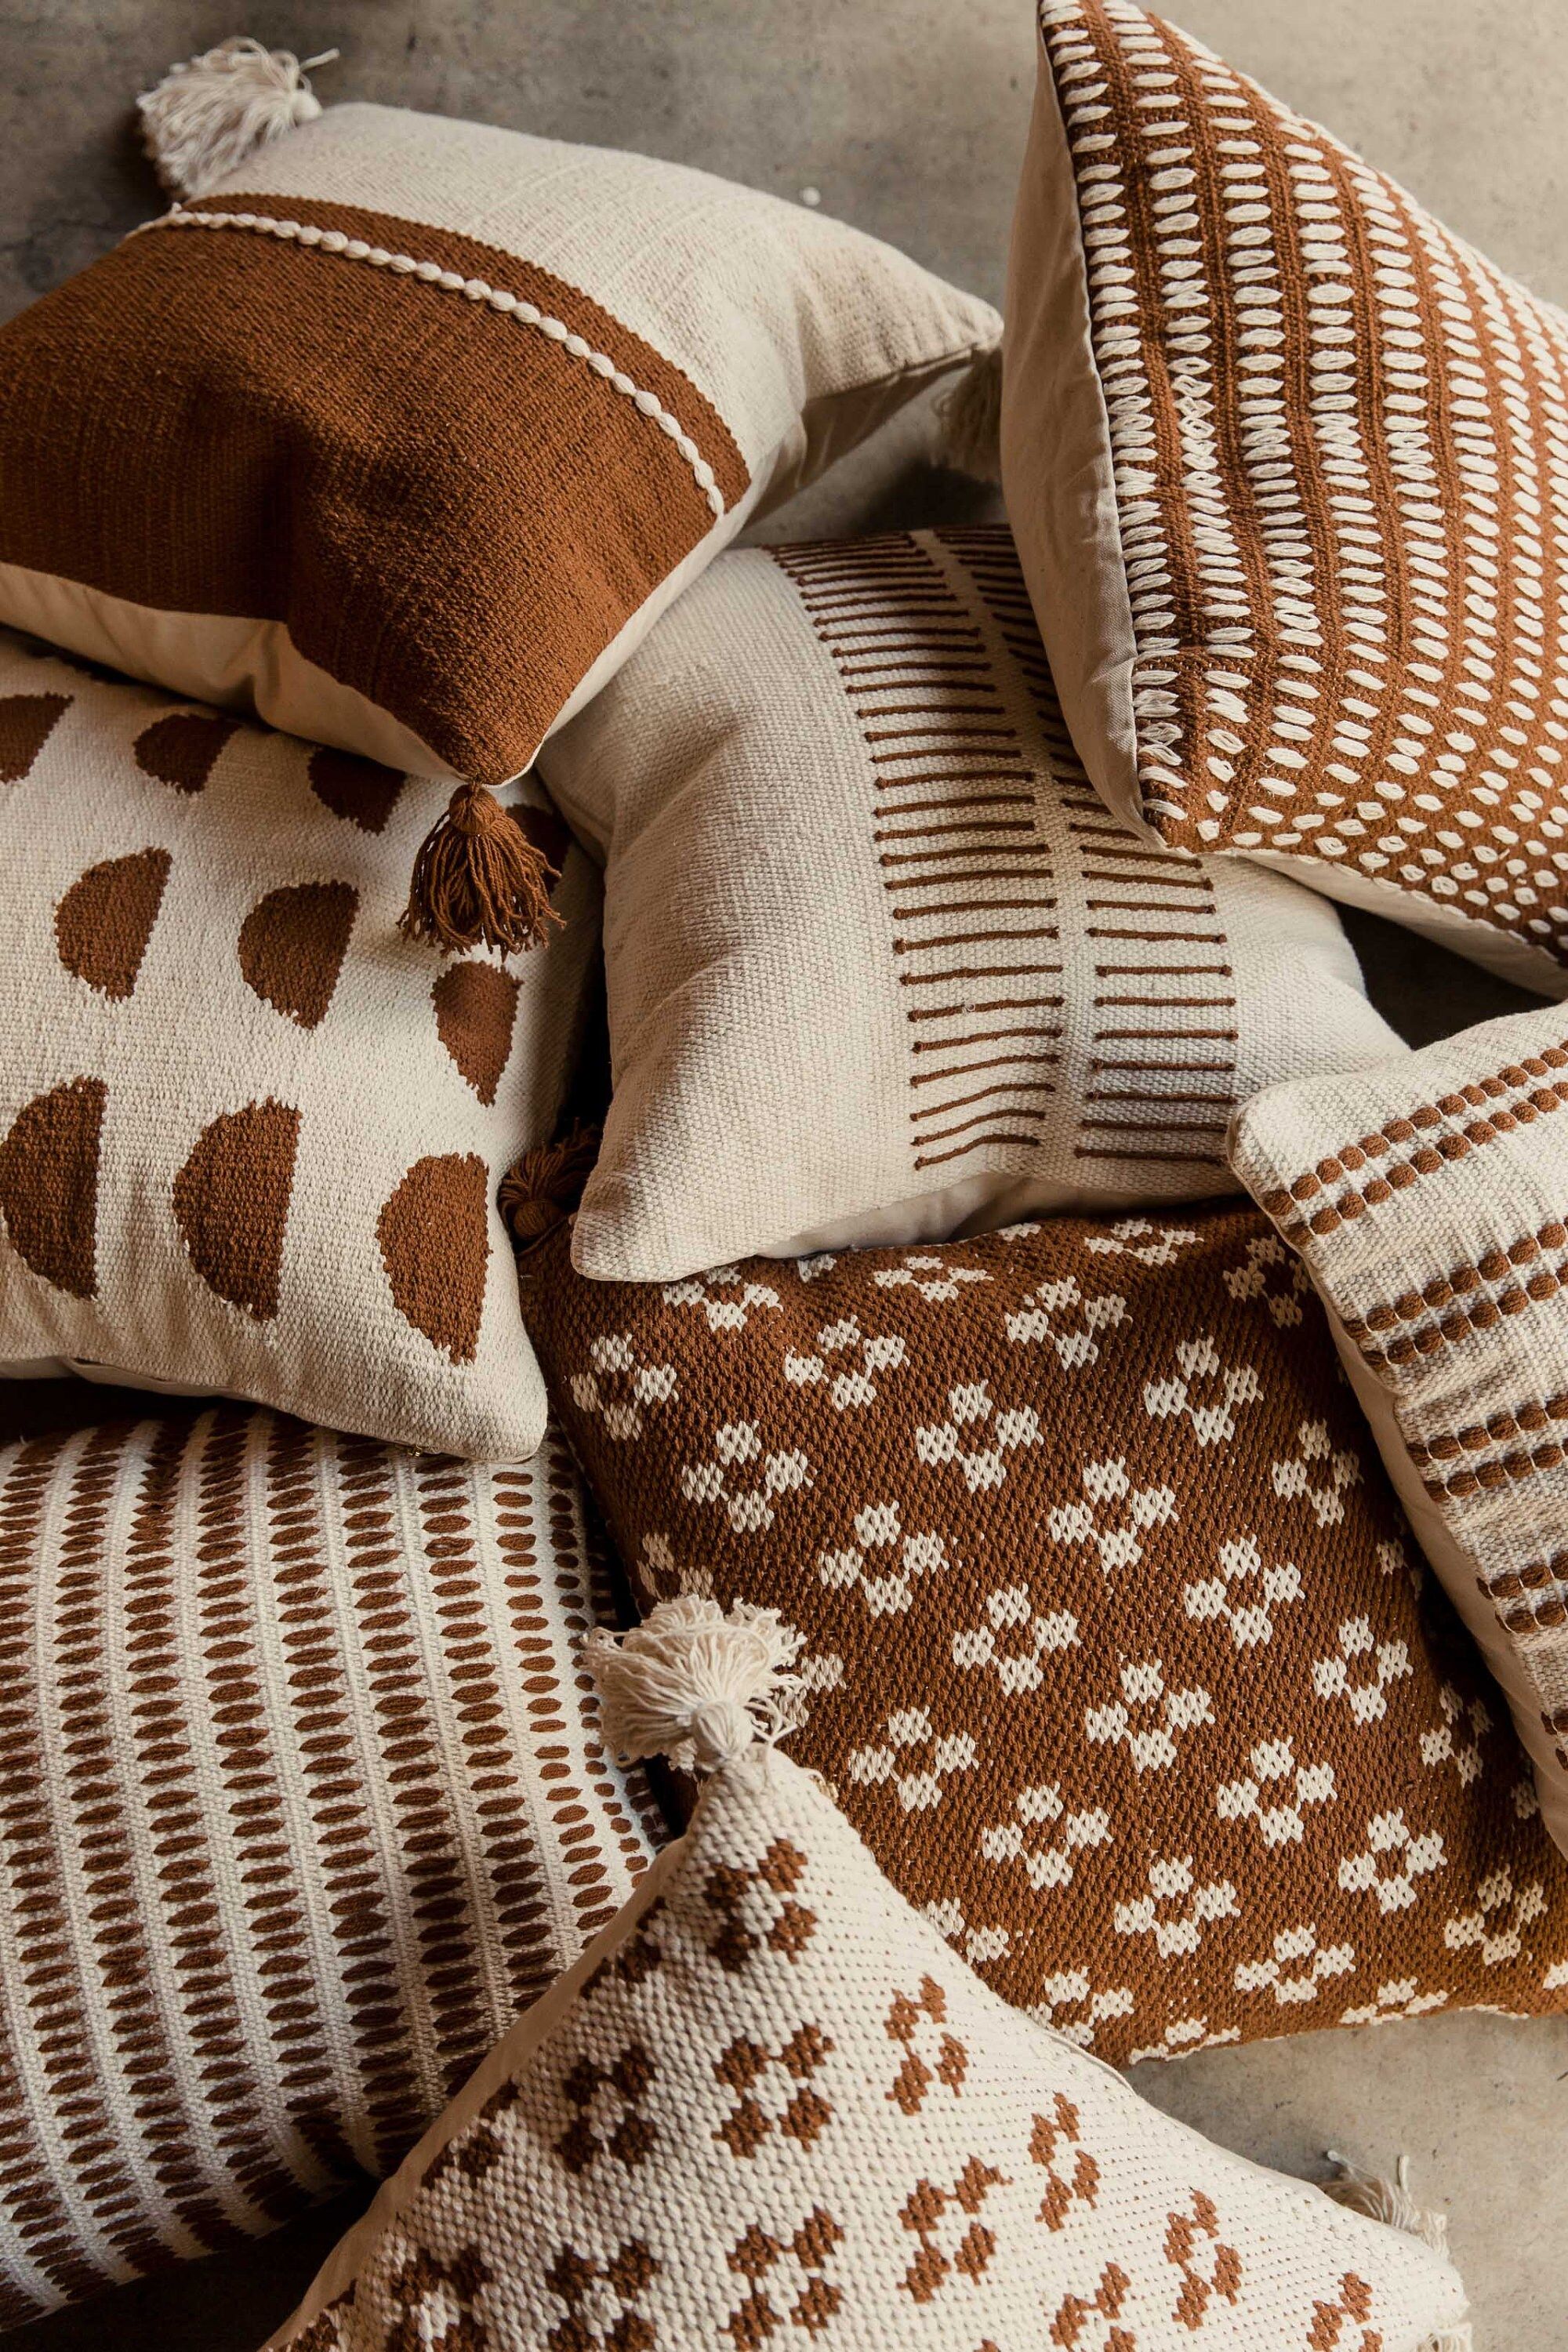 Throw Pillows - The Perfect Home Decor Accent